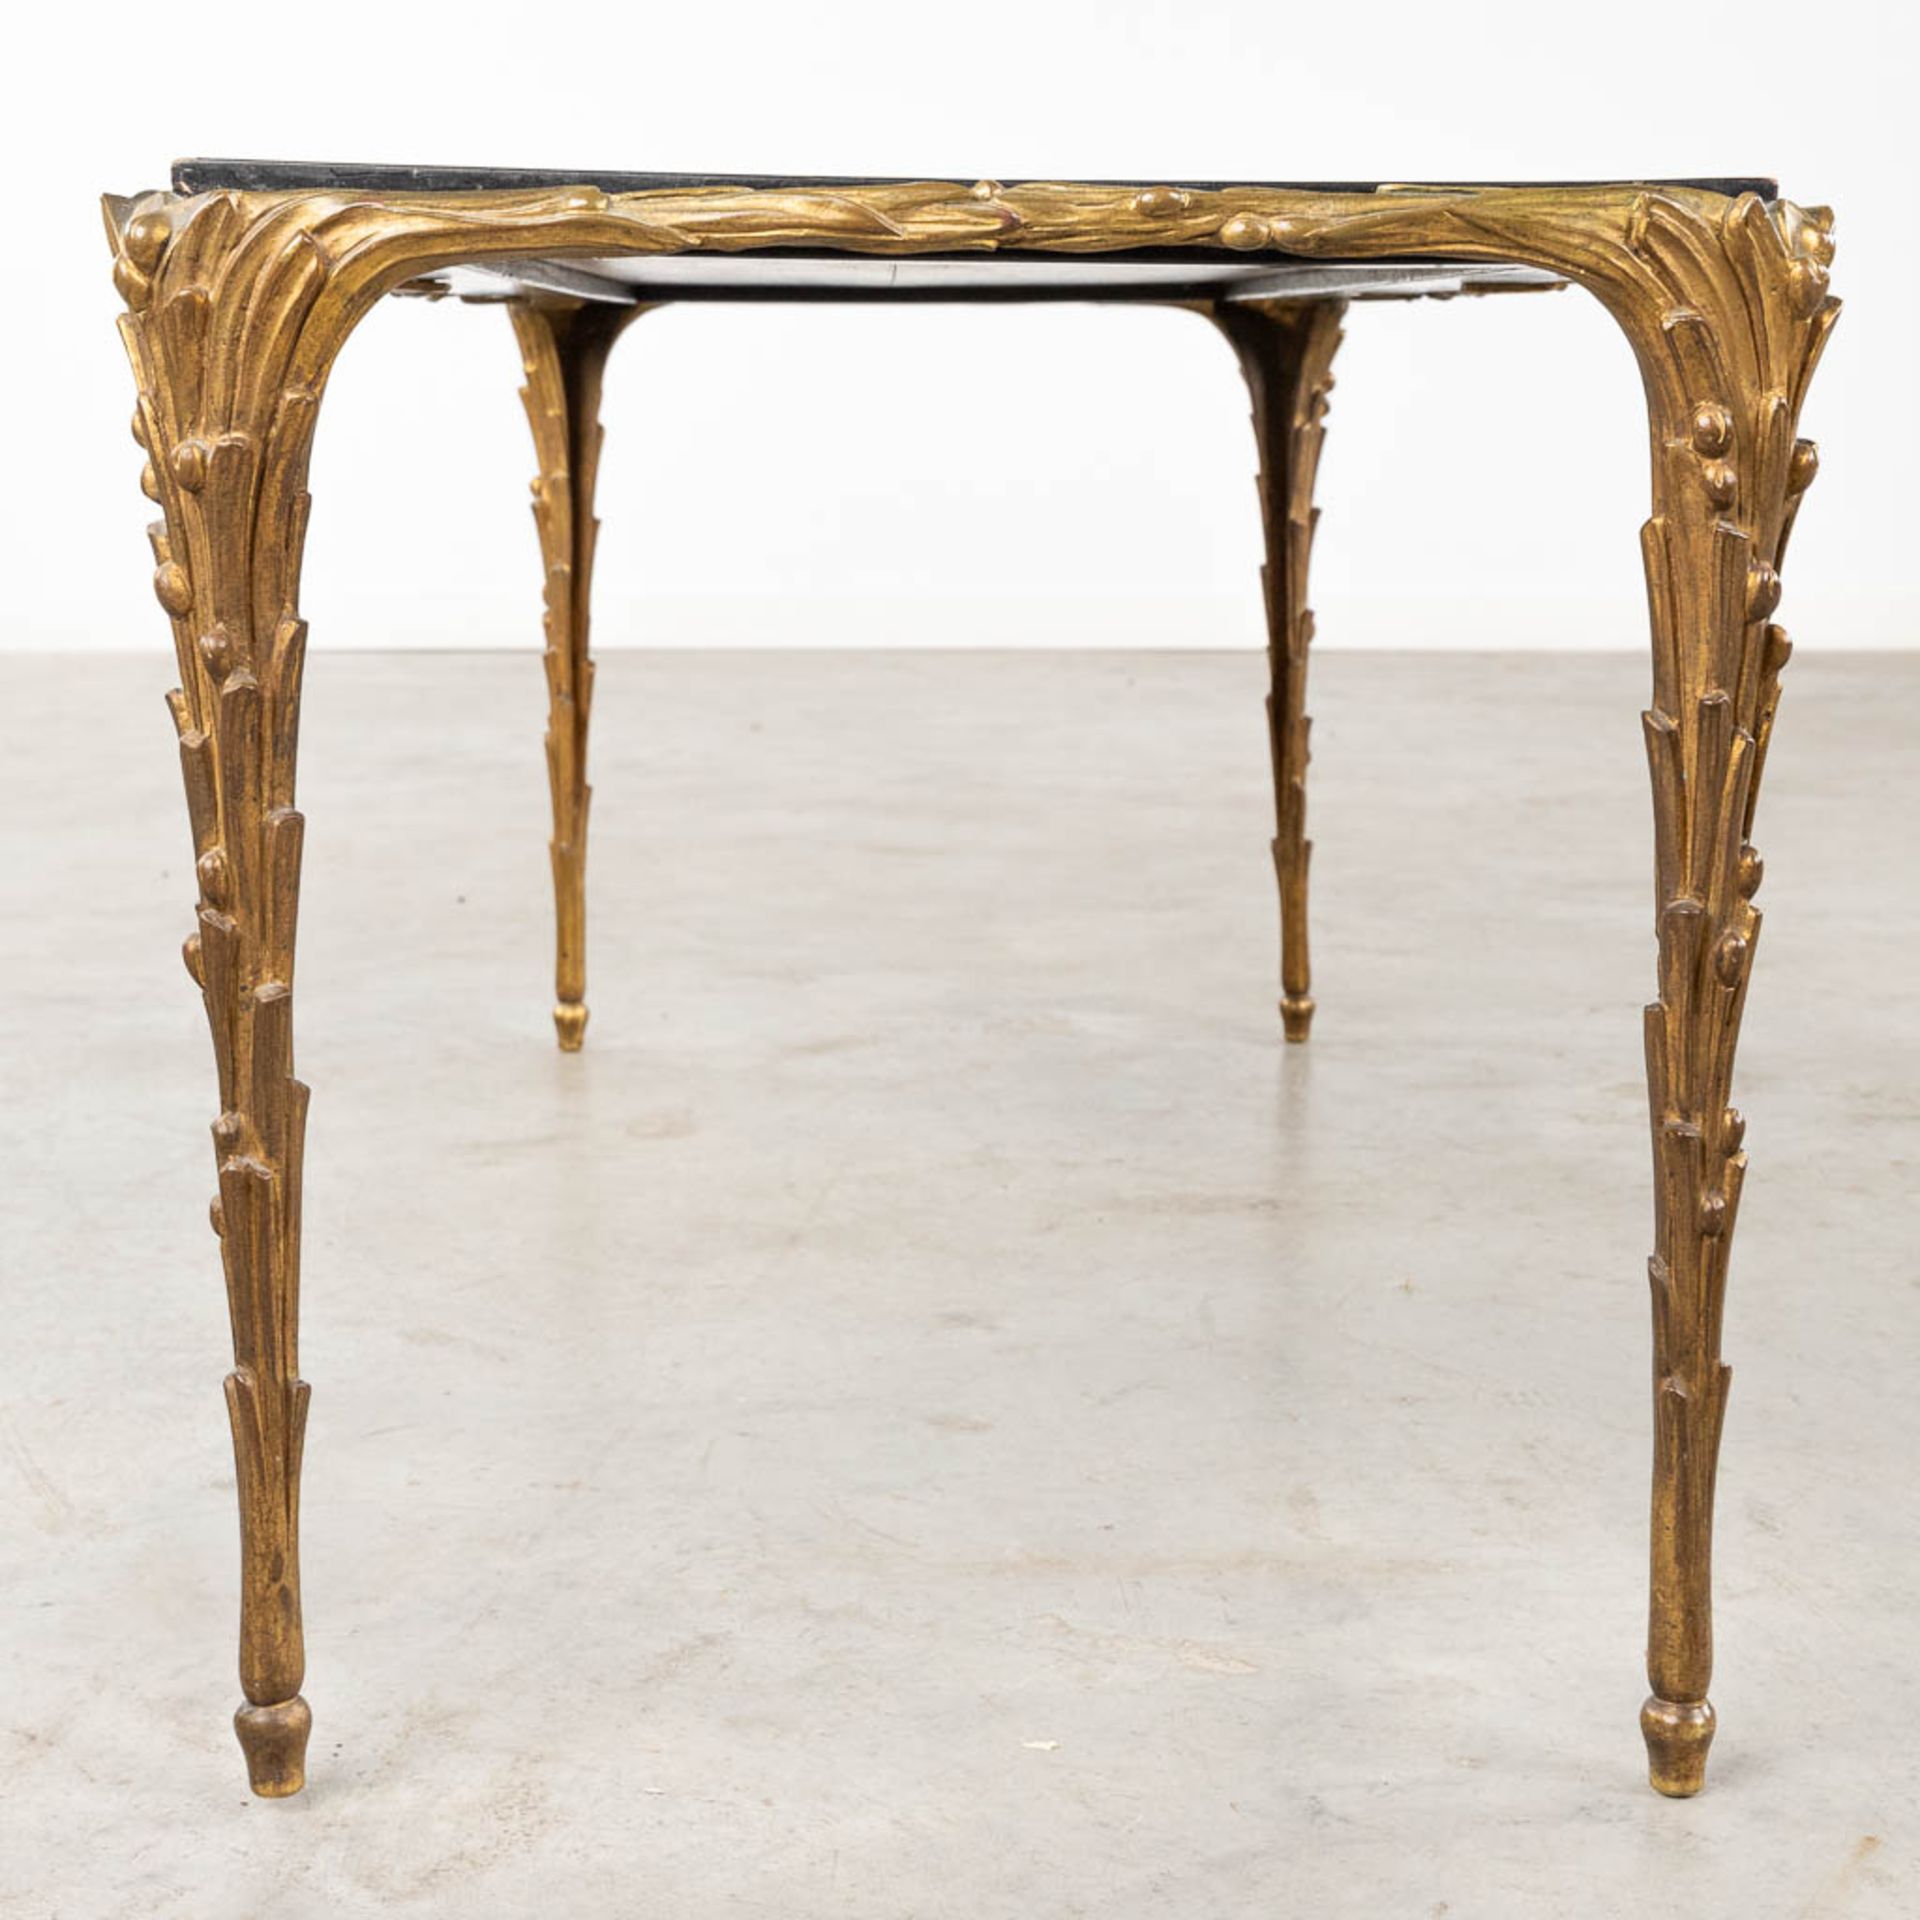 Maison Bagues 'Mid-Century Coffee Table' with lacquered Chinoiserie decor. (D:43 x W:100 x H:42 cm) - Image 7 of 20